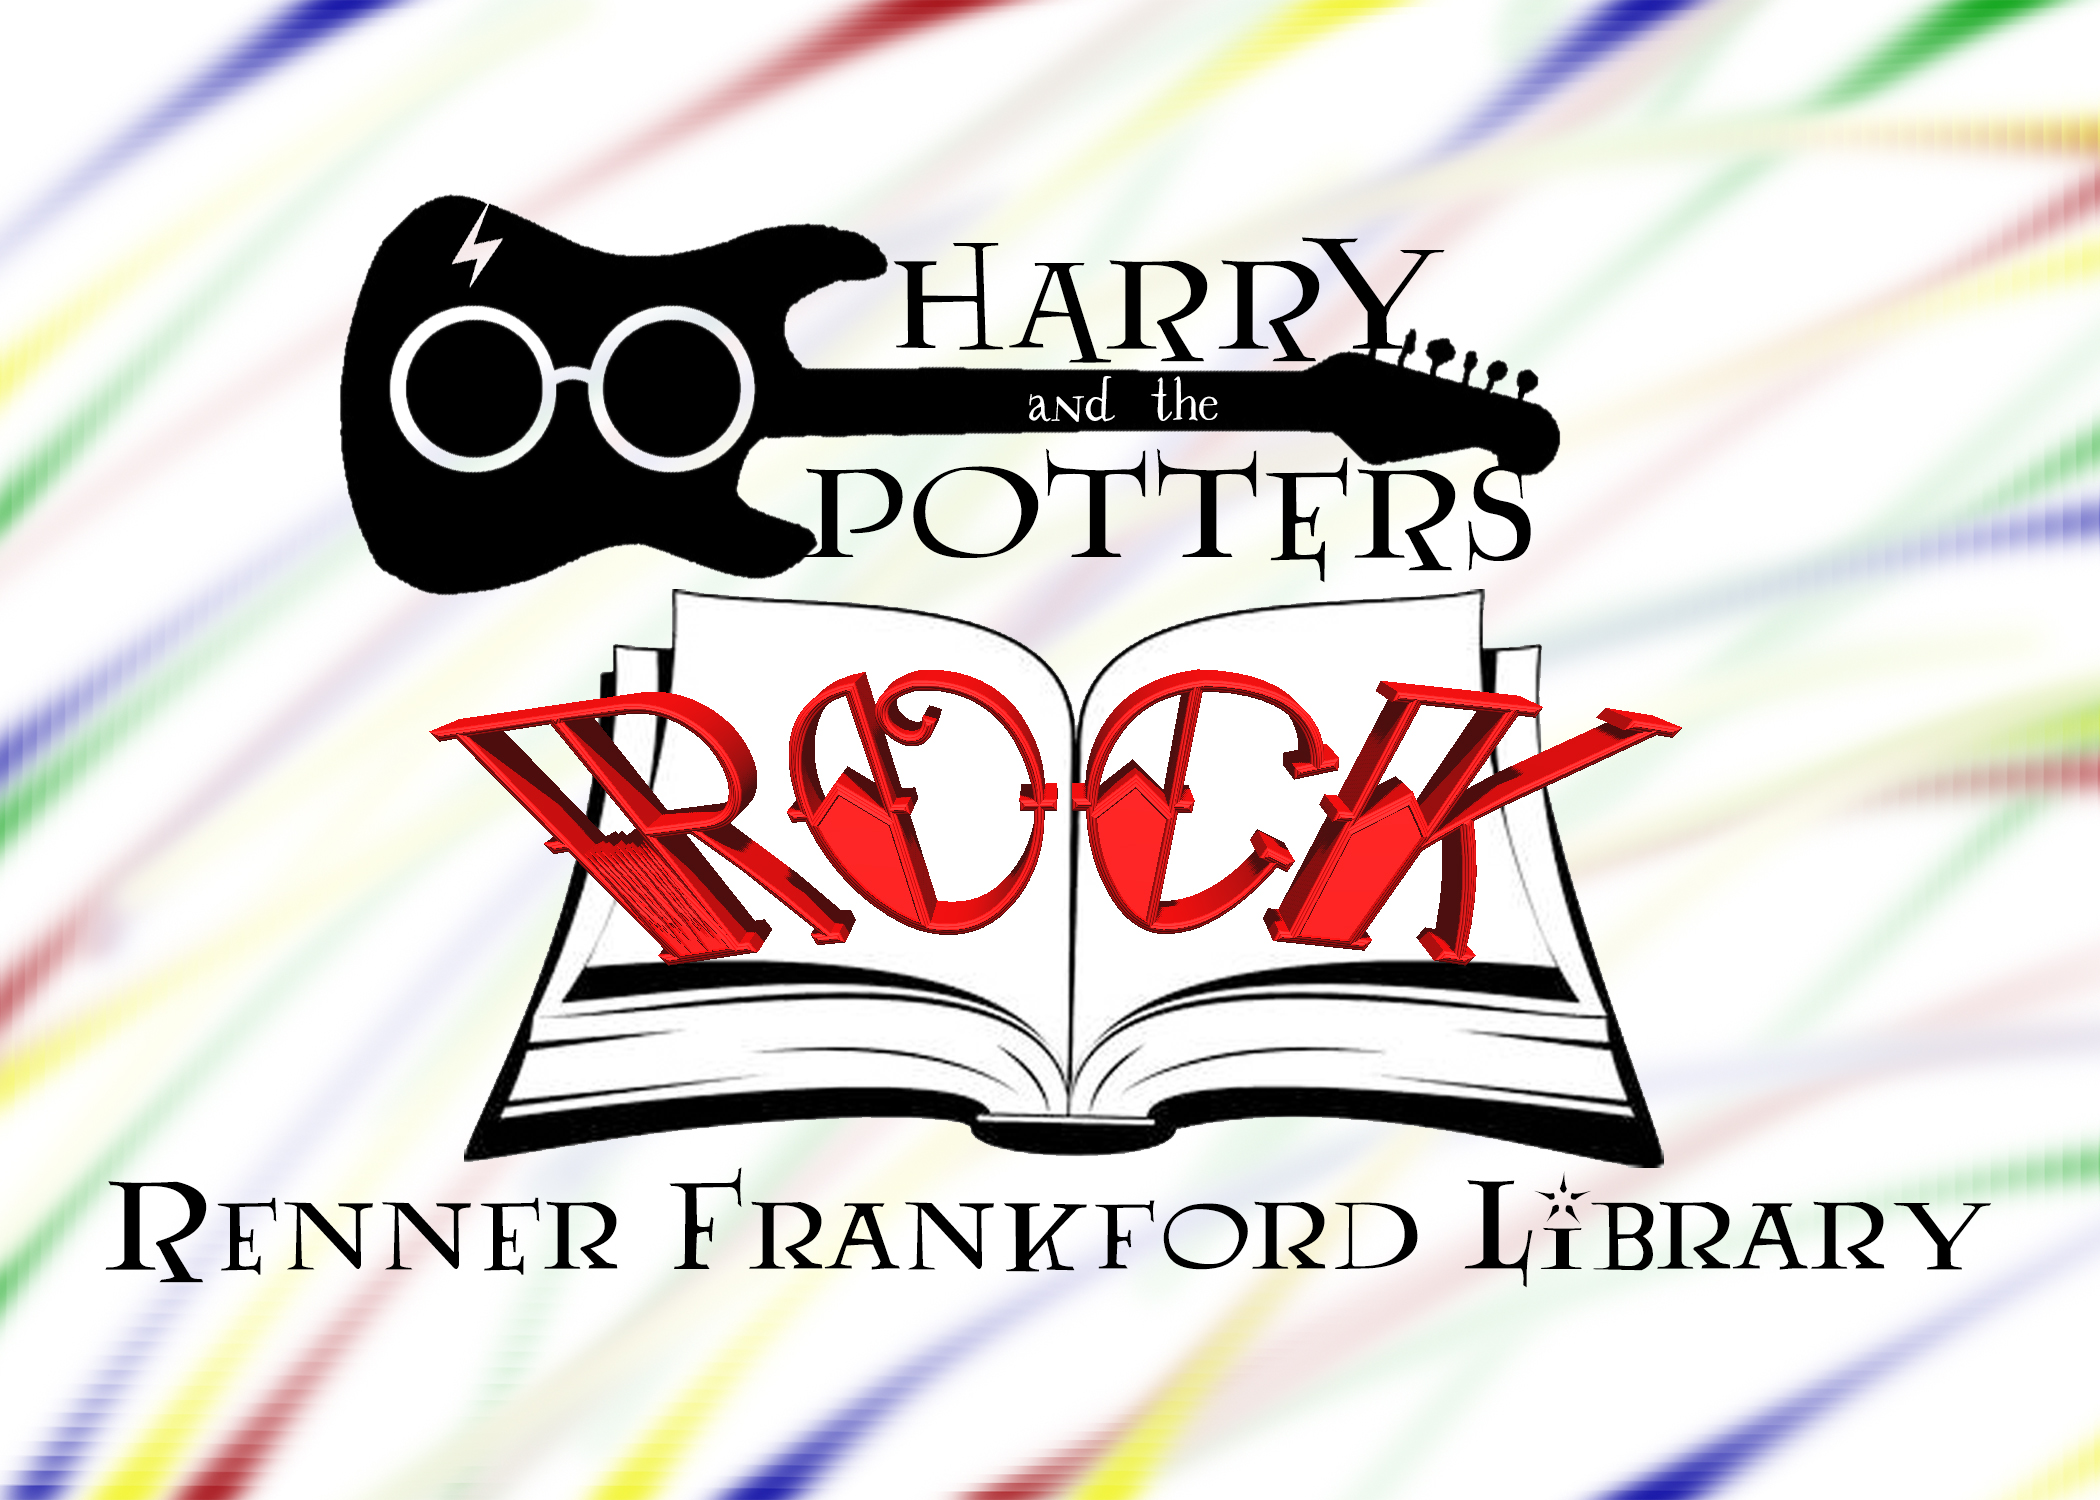 Harry and the Potters ROCK Renner Frankford Library